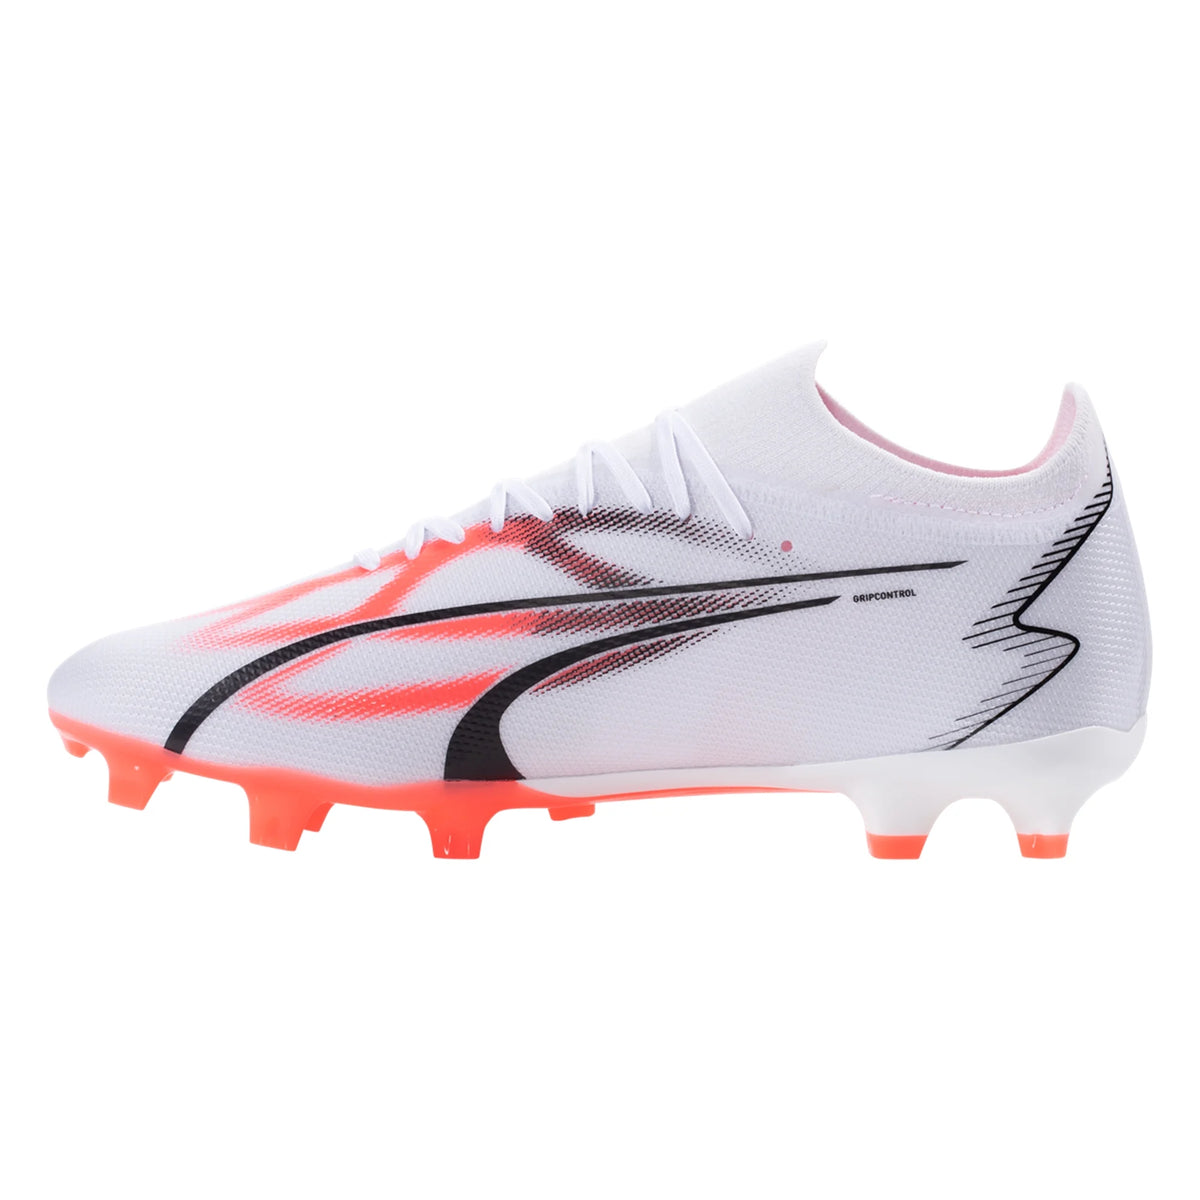 Puma Ultra Soccer USA White/Black/Fire Cleat Orchid Firm Match 107347-01 - FG/AG Zone – Ground Soccer